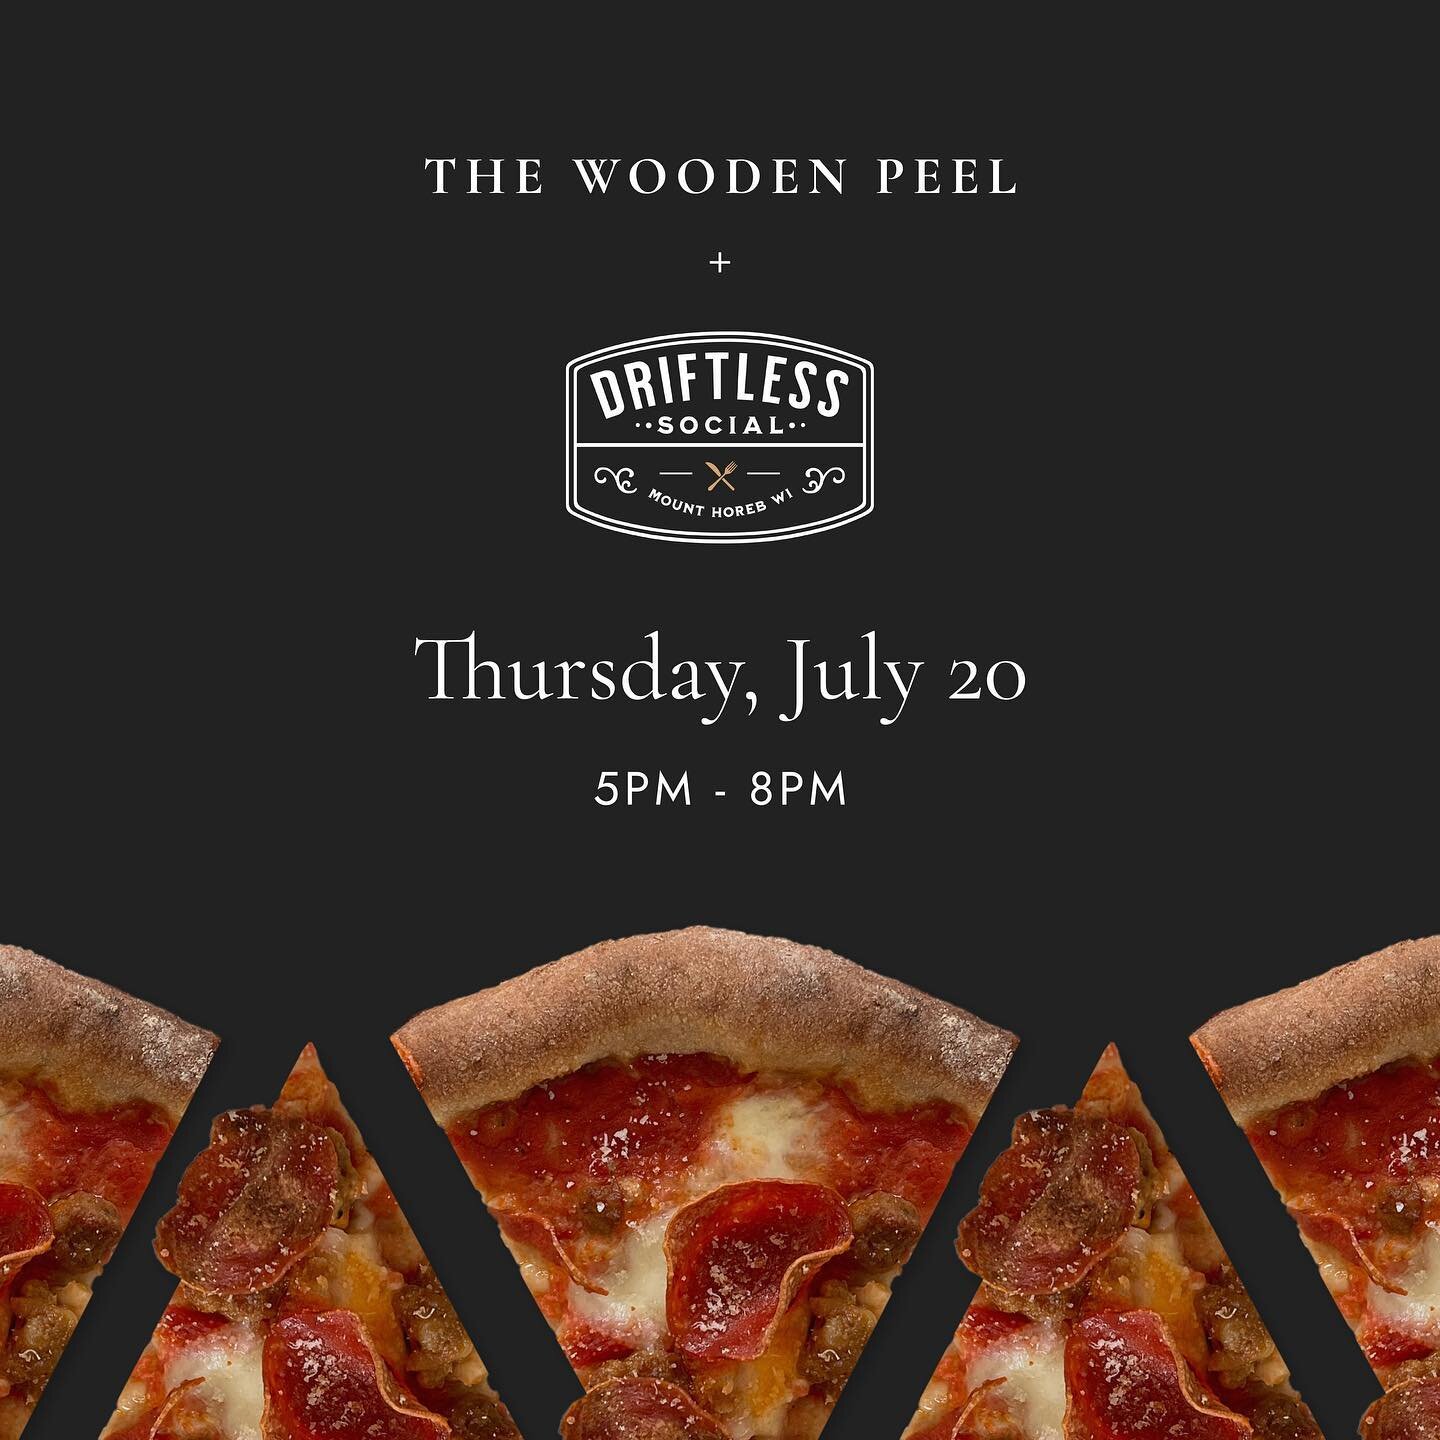 Maybe you've heard by now? @driftlesssocial is hosting The Wooden Peel for a pop up on Thursday, July 20th! We'll be there from 5pm-8pm. Pre-order to guarantee your pizzas and assure little wait time (see link in bio). We'll be accepting walk ups as 